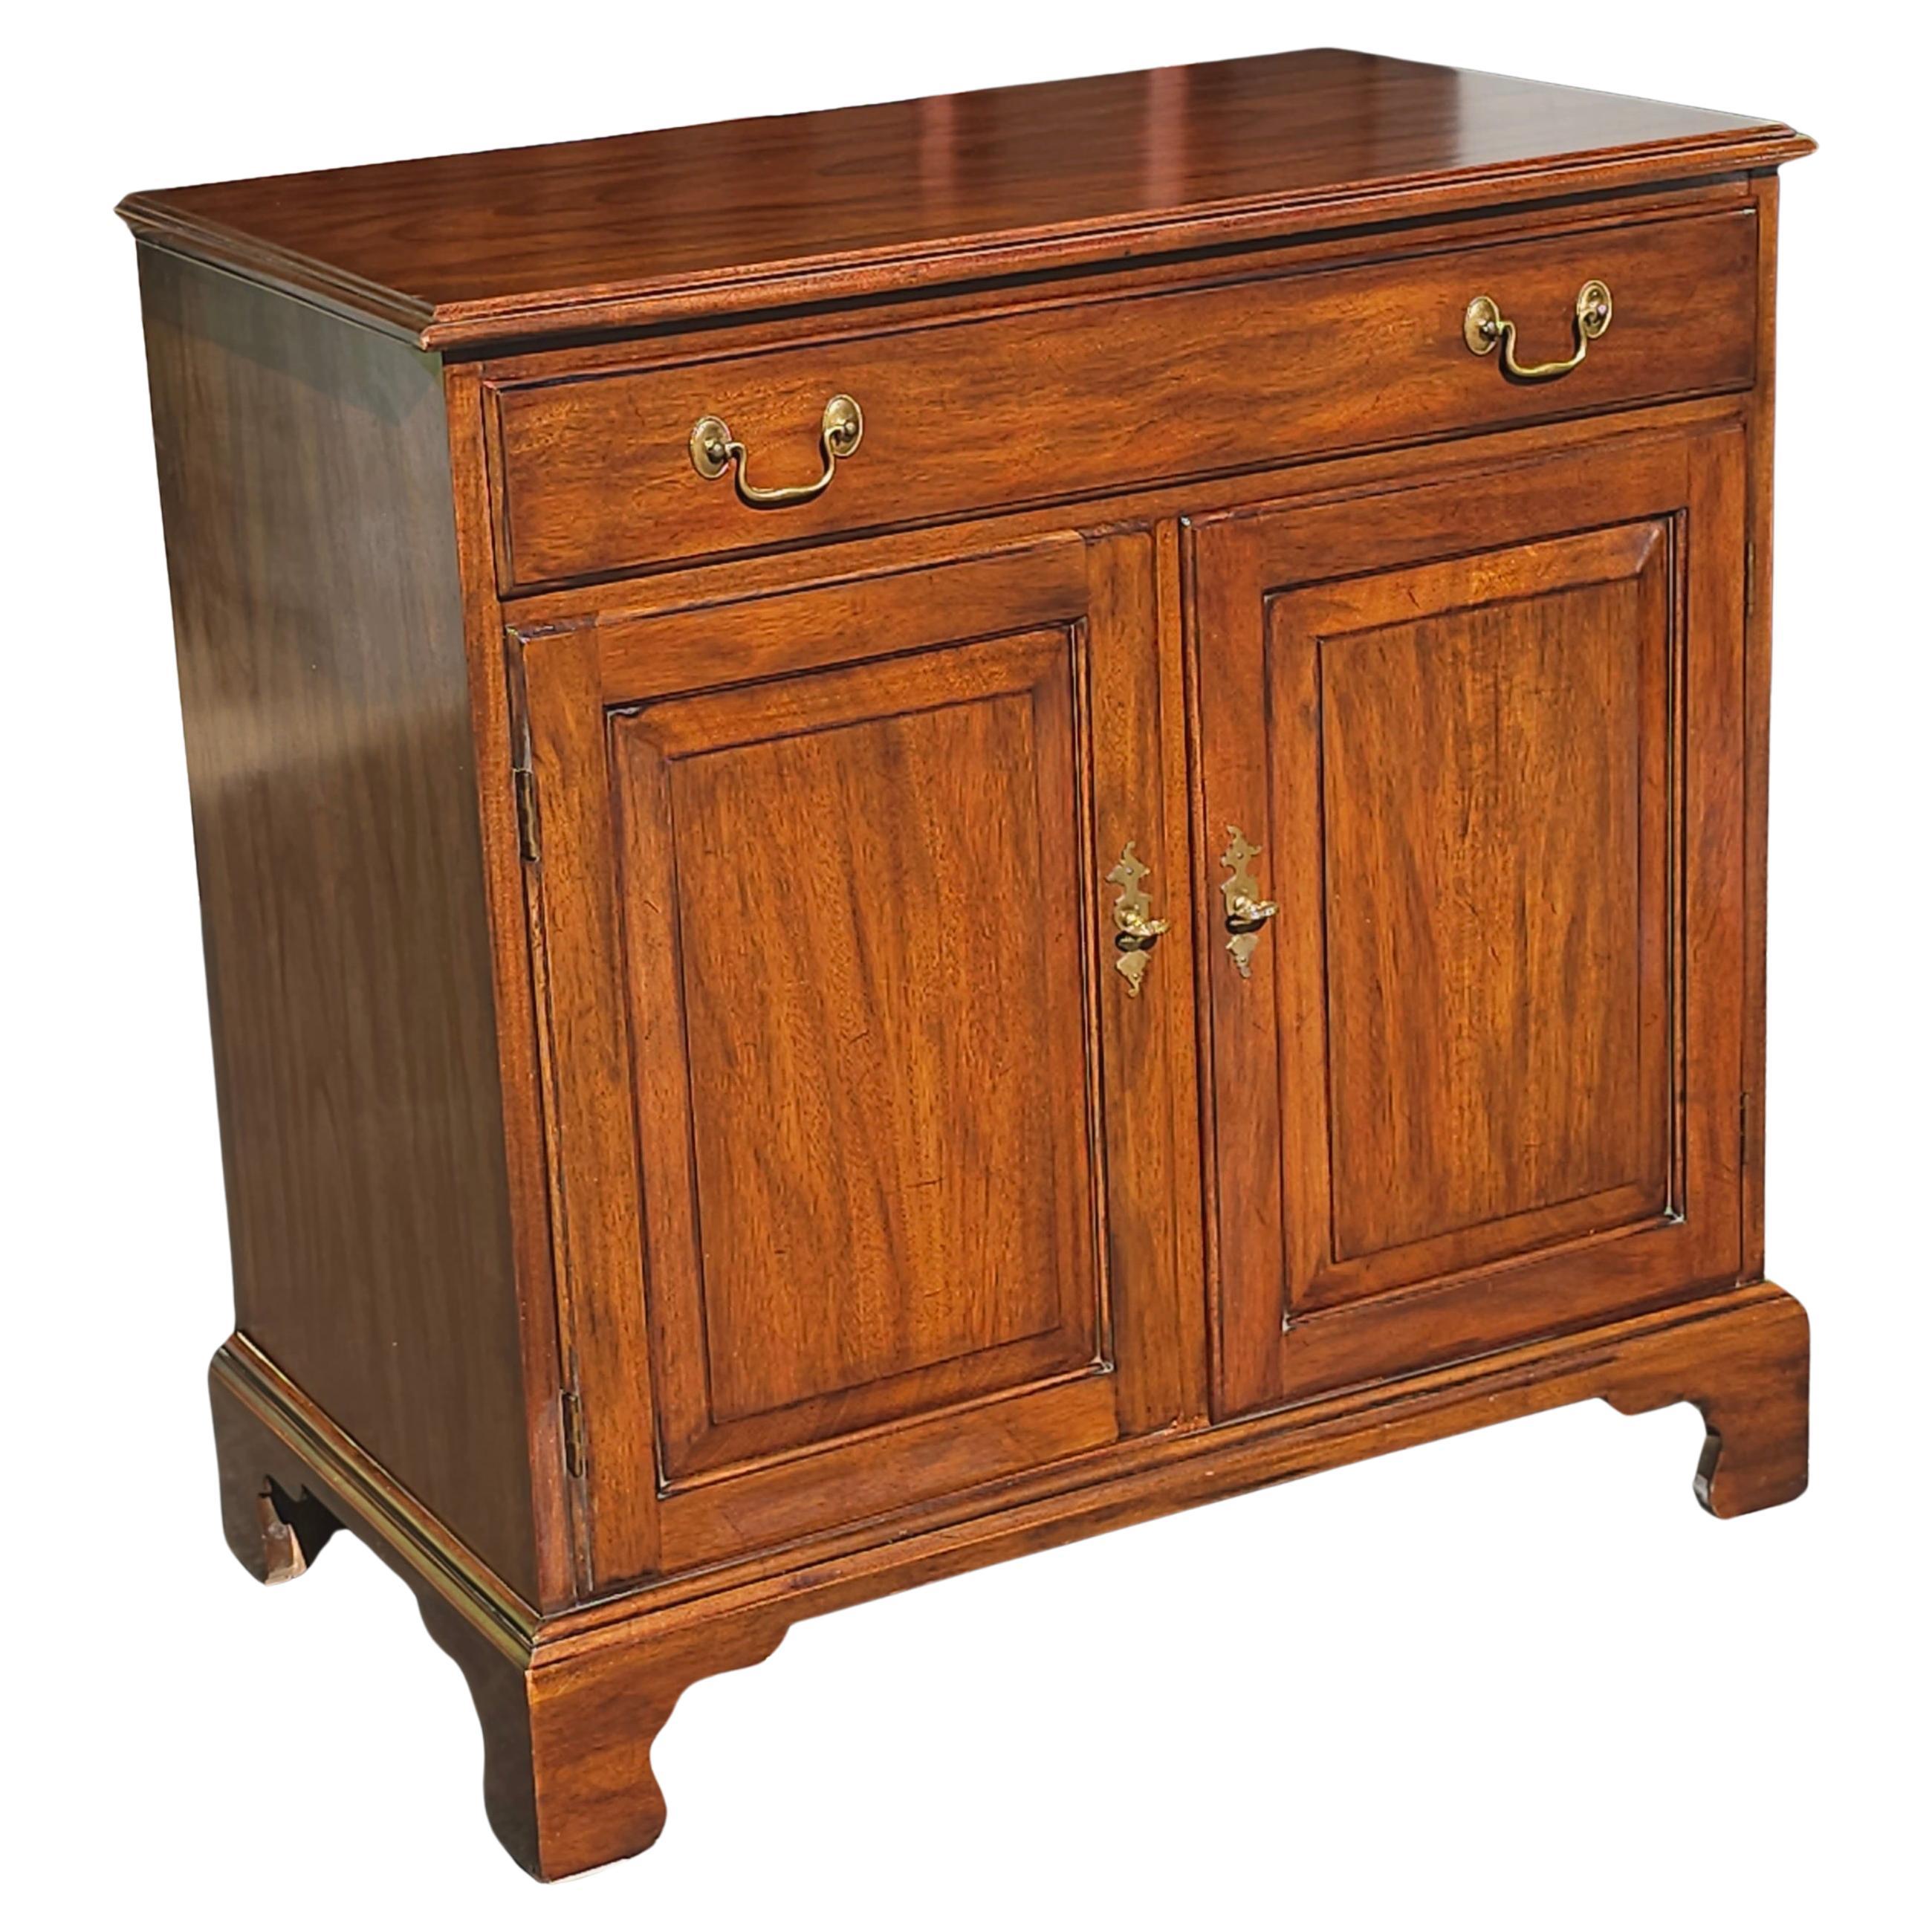 Henkel Harris Virginia Galleries Chippendale Mahogany Cabinet Server. Features un top drawer with dovetail joints and a lower, divided storage area. Will make a great liquor cabinet as well. 
Measures 34